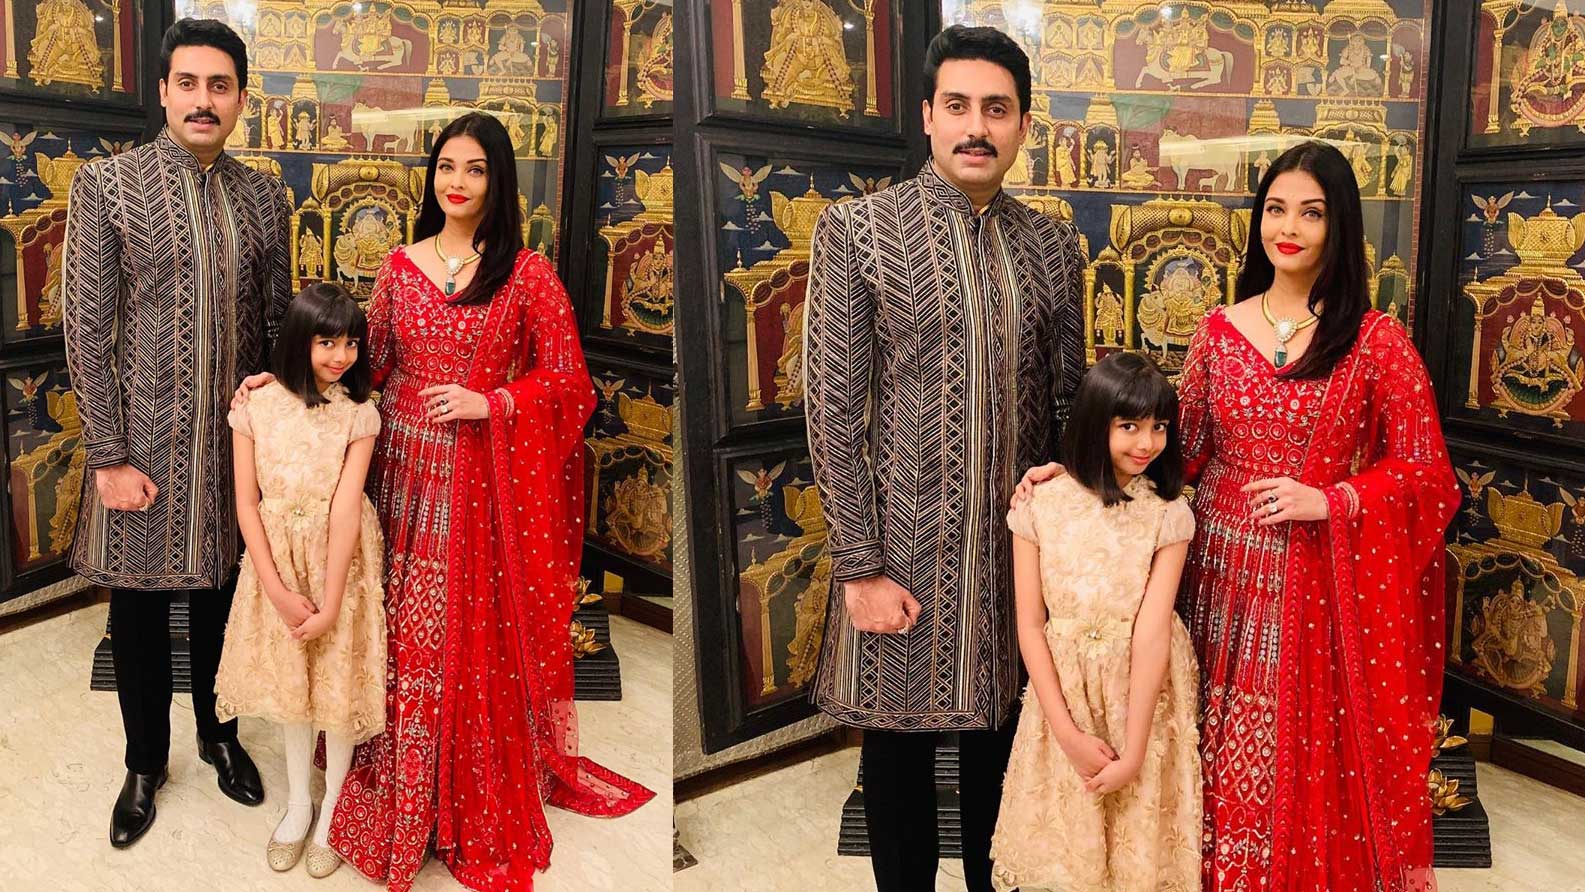 Aishwarya Rai Bachchan shares most adorable family picture with Abhishek  Bachchan and Aaradhya | Hindi Movie News - Bollywood - Times of India